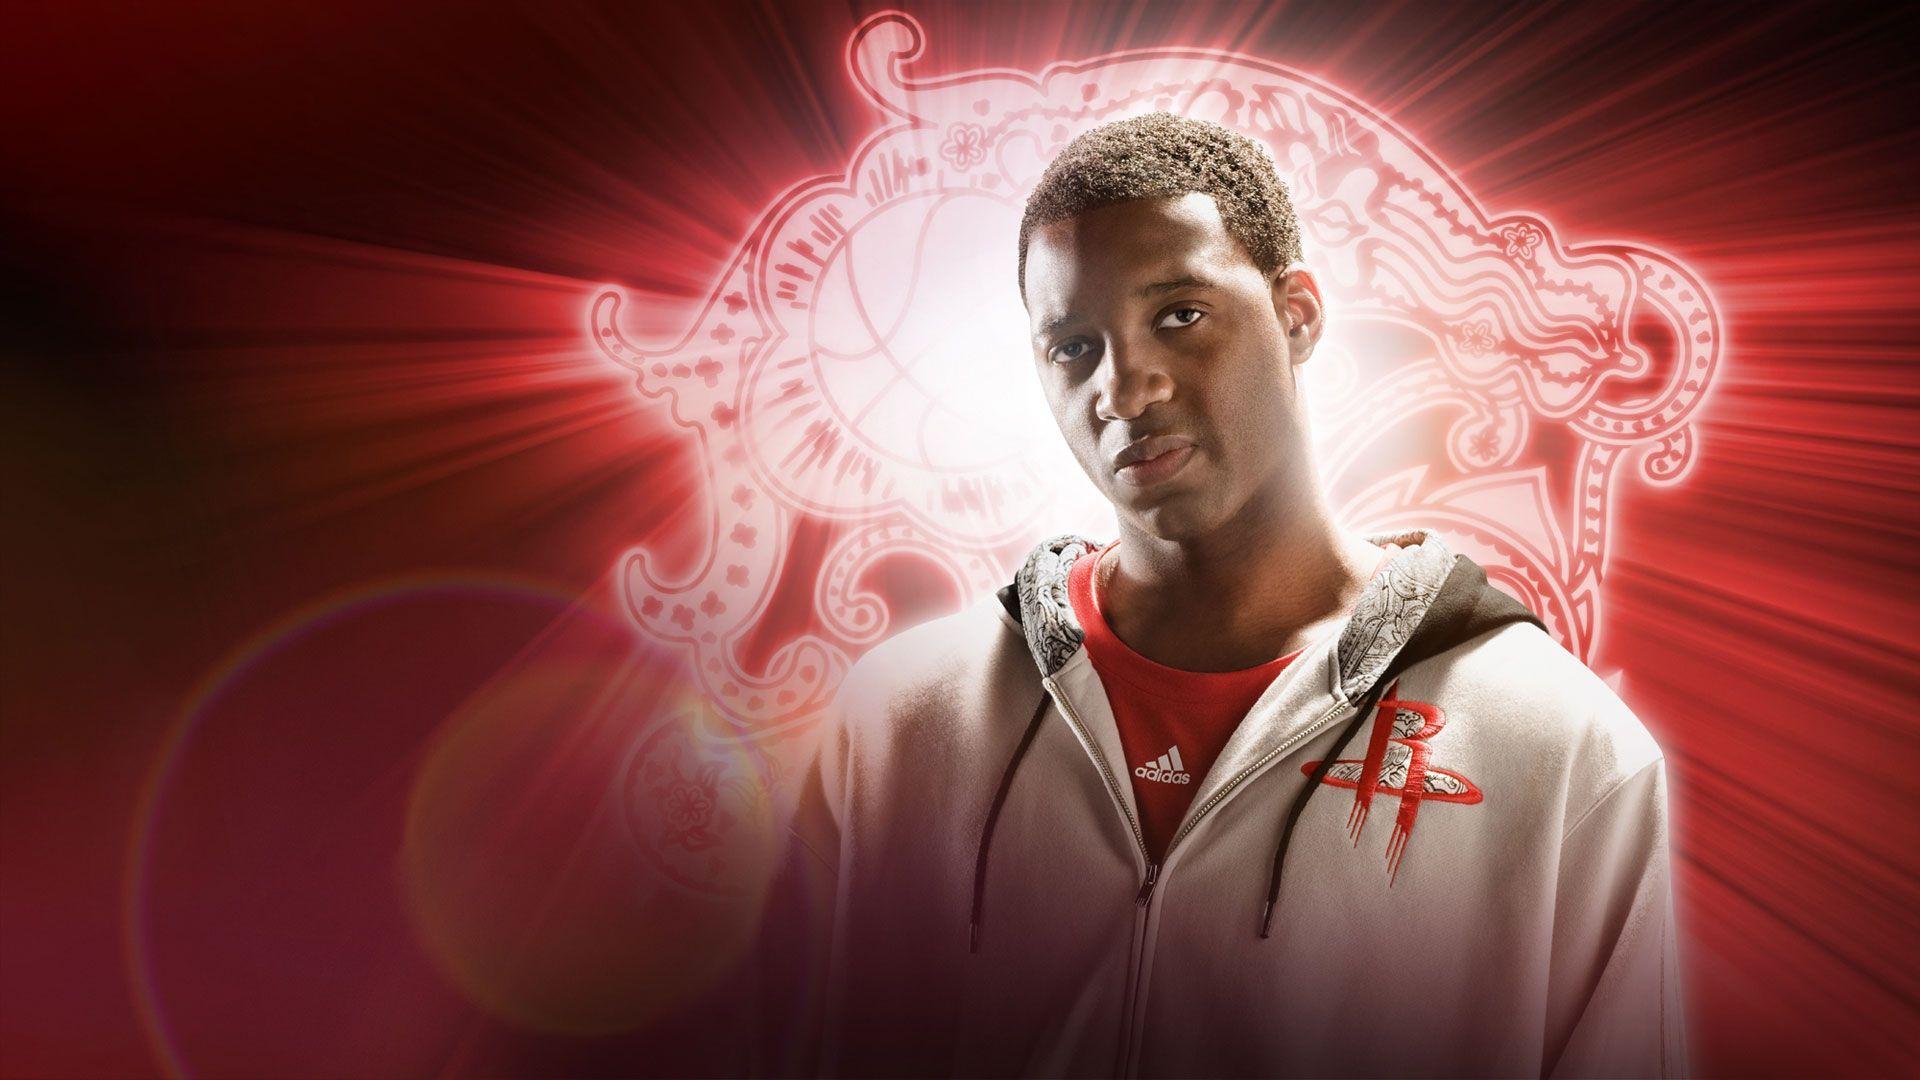 Tracy McGrady Wallpapers - Wallpaper Cave